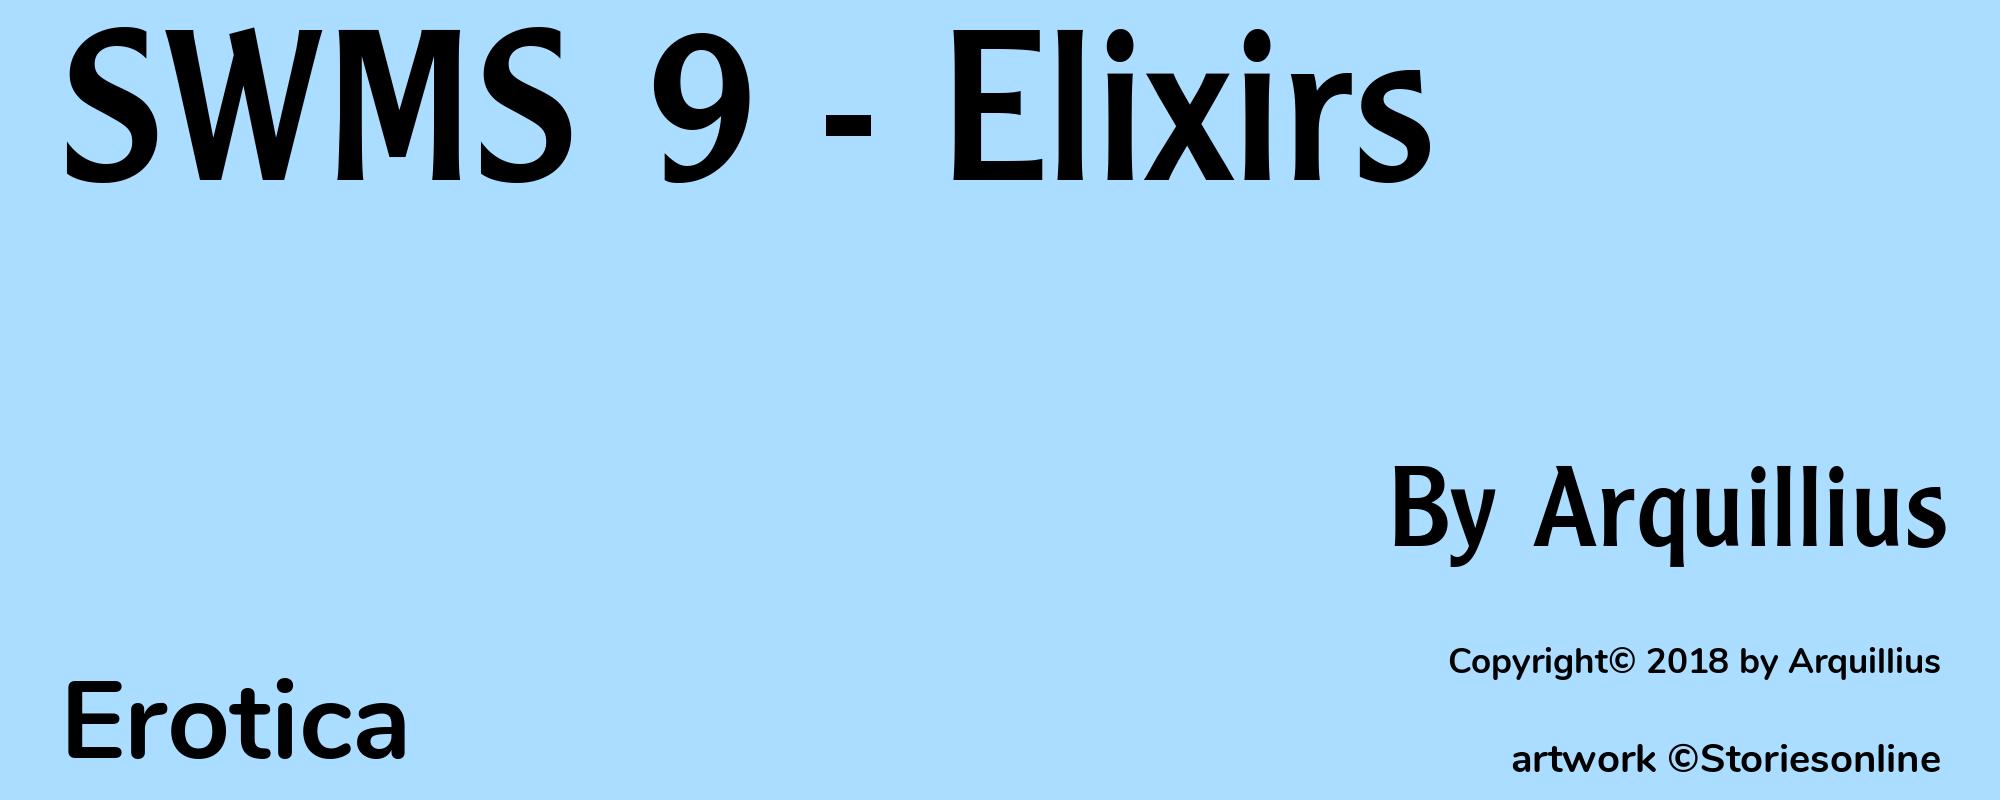 SWMS 9 - Elixirs - Cover